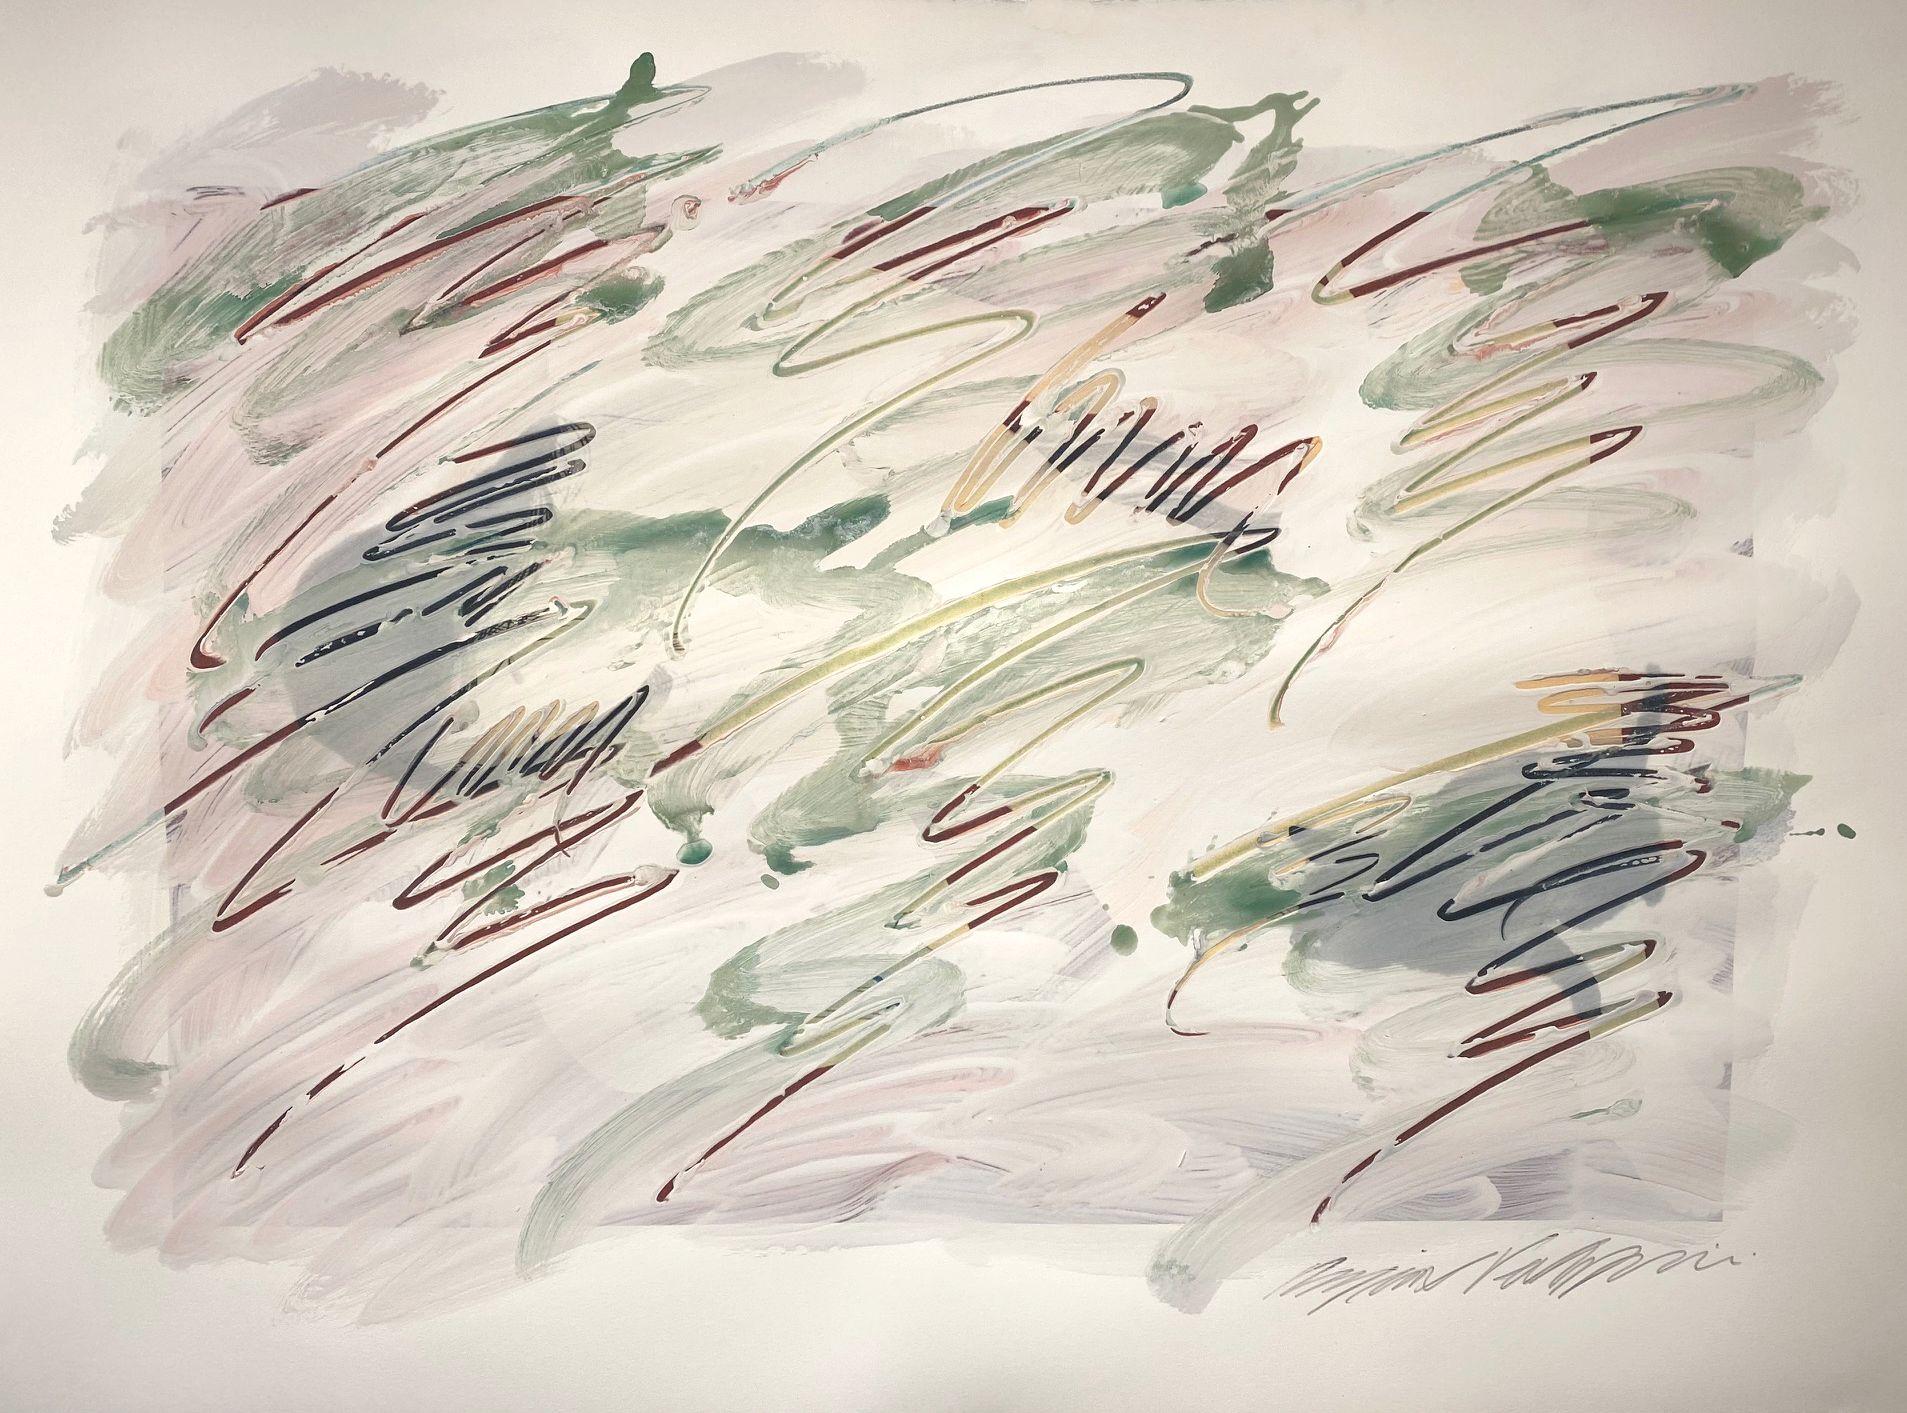 Abstract Wall Art Drawing/Painting #12192022, Mixed Media on Watercolor Paper - Mixed Media Art by Michael Verlangieri